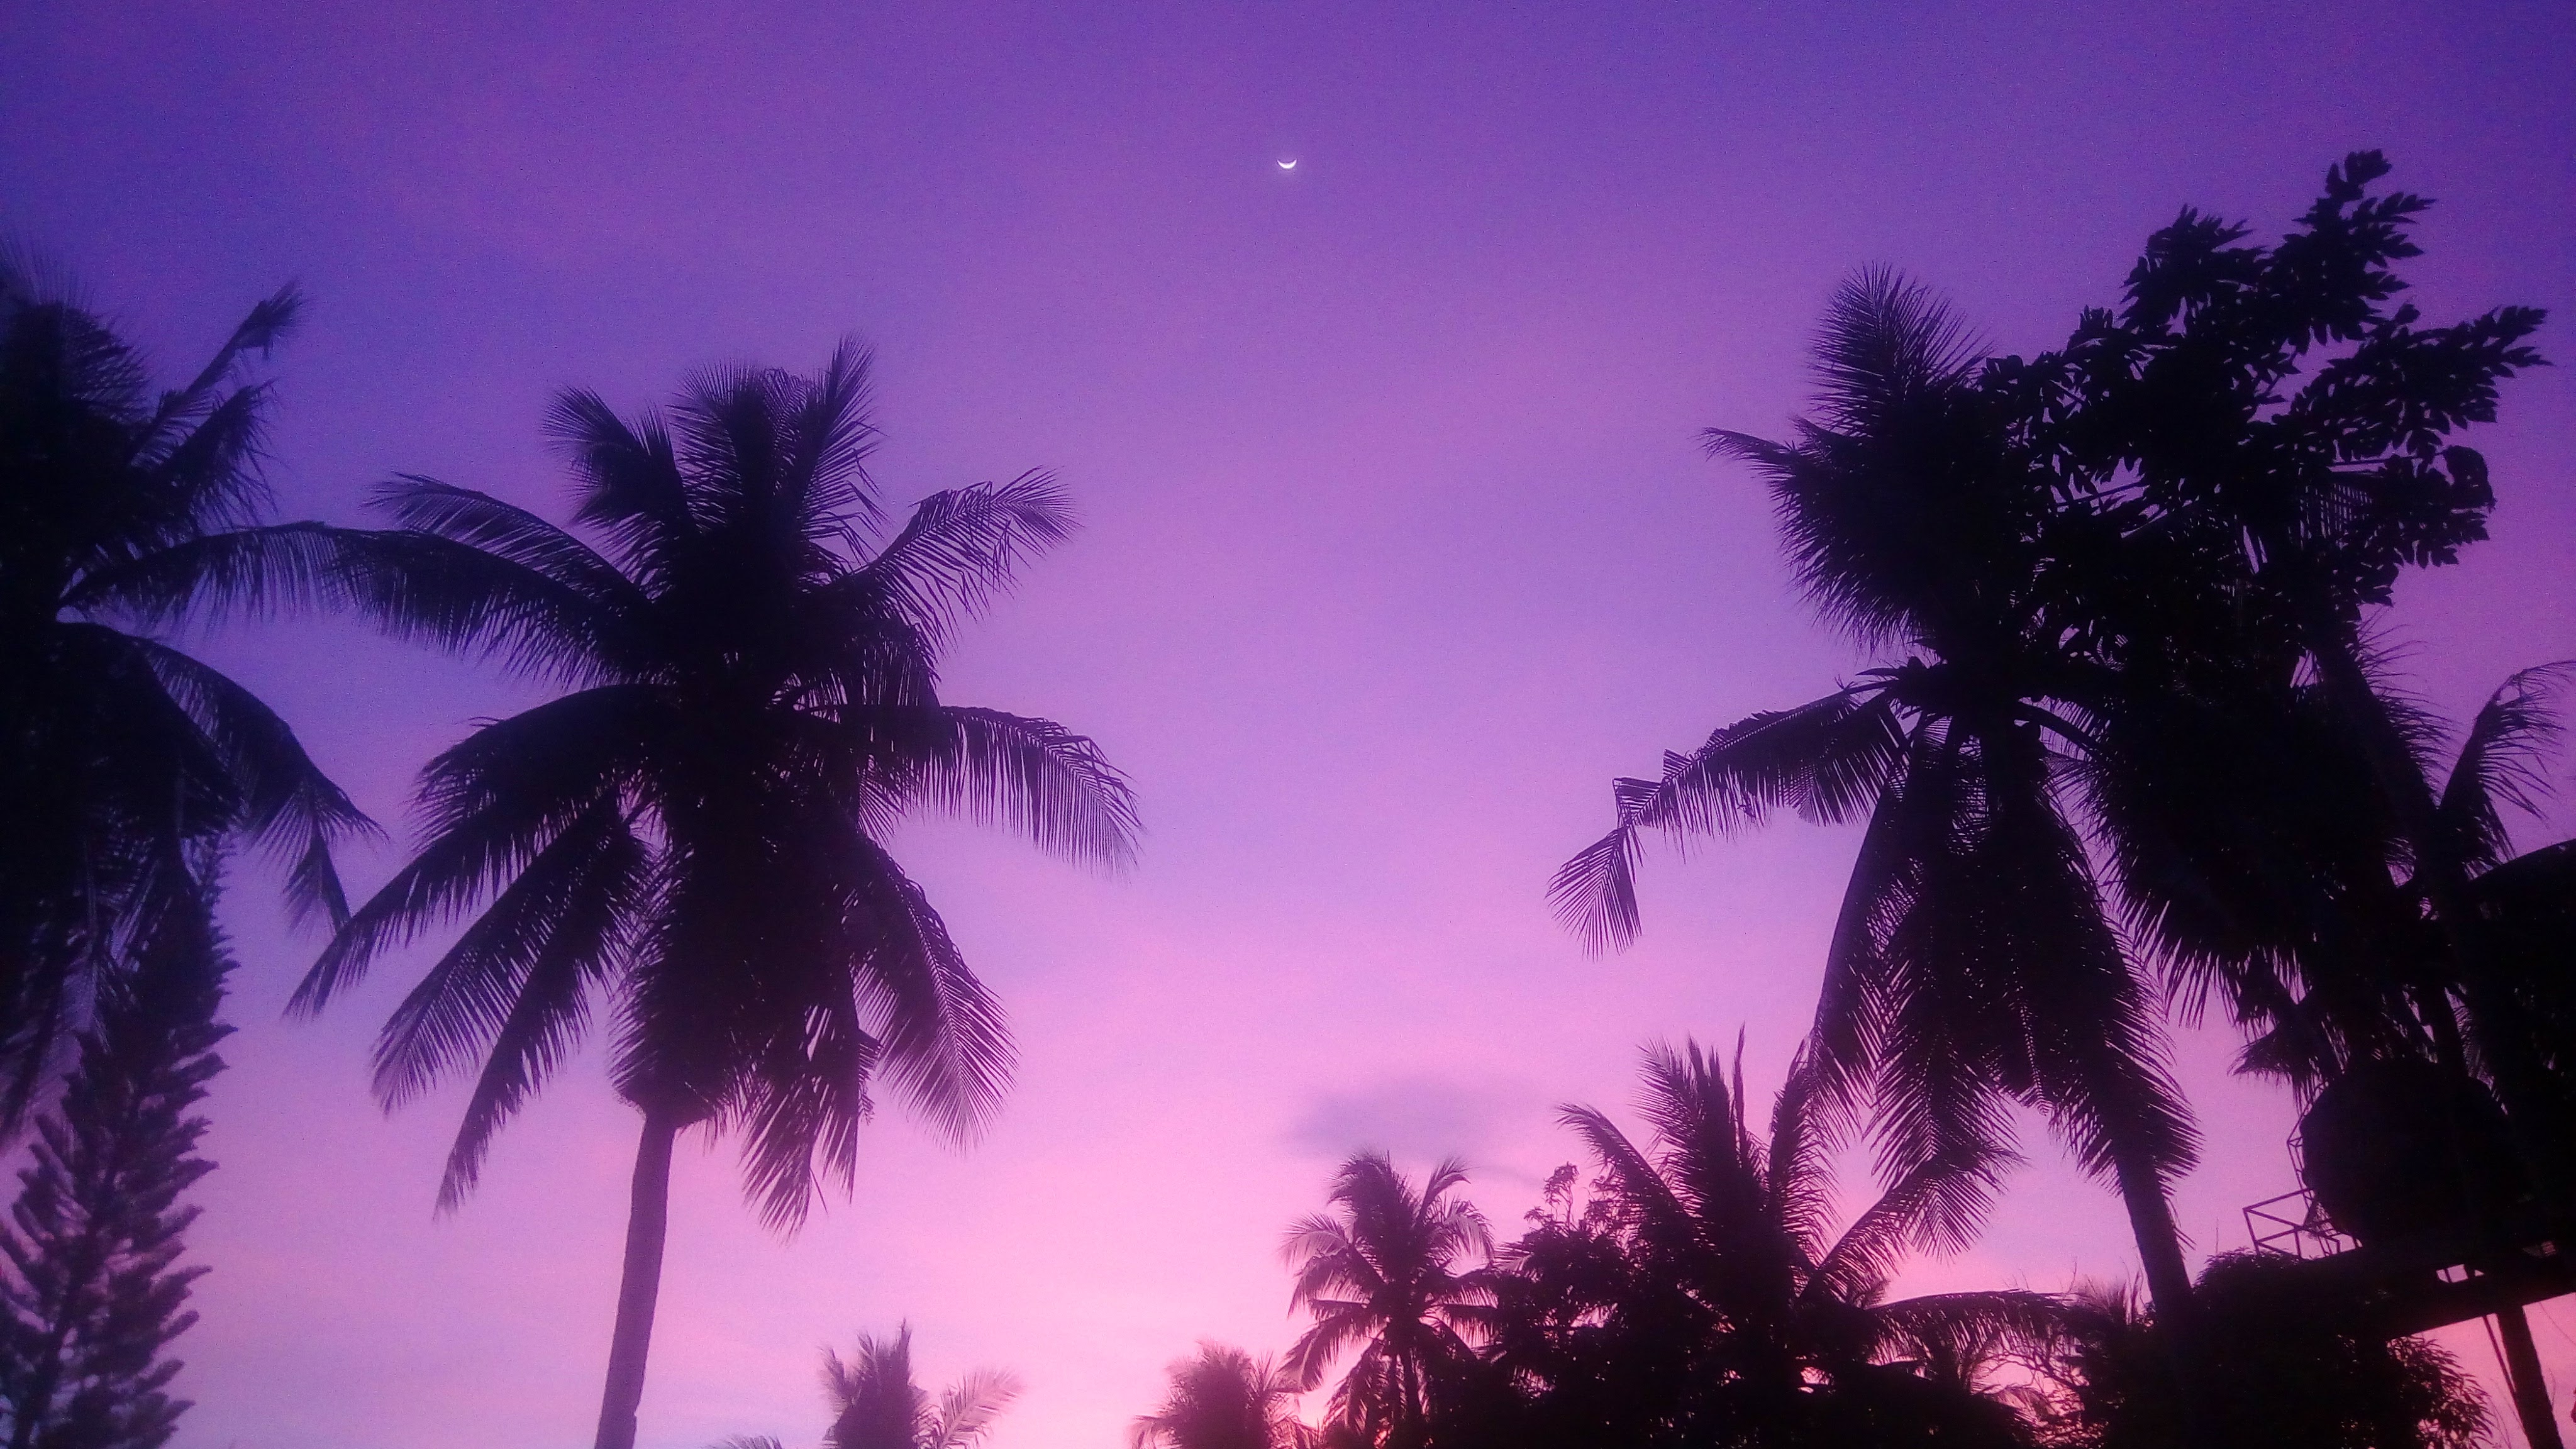 General 4096x2304 colorful purple background purple palm trees shadow retrowave sun rays crescent moon